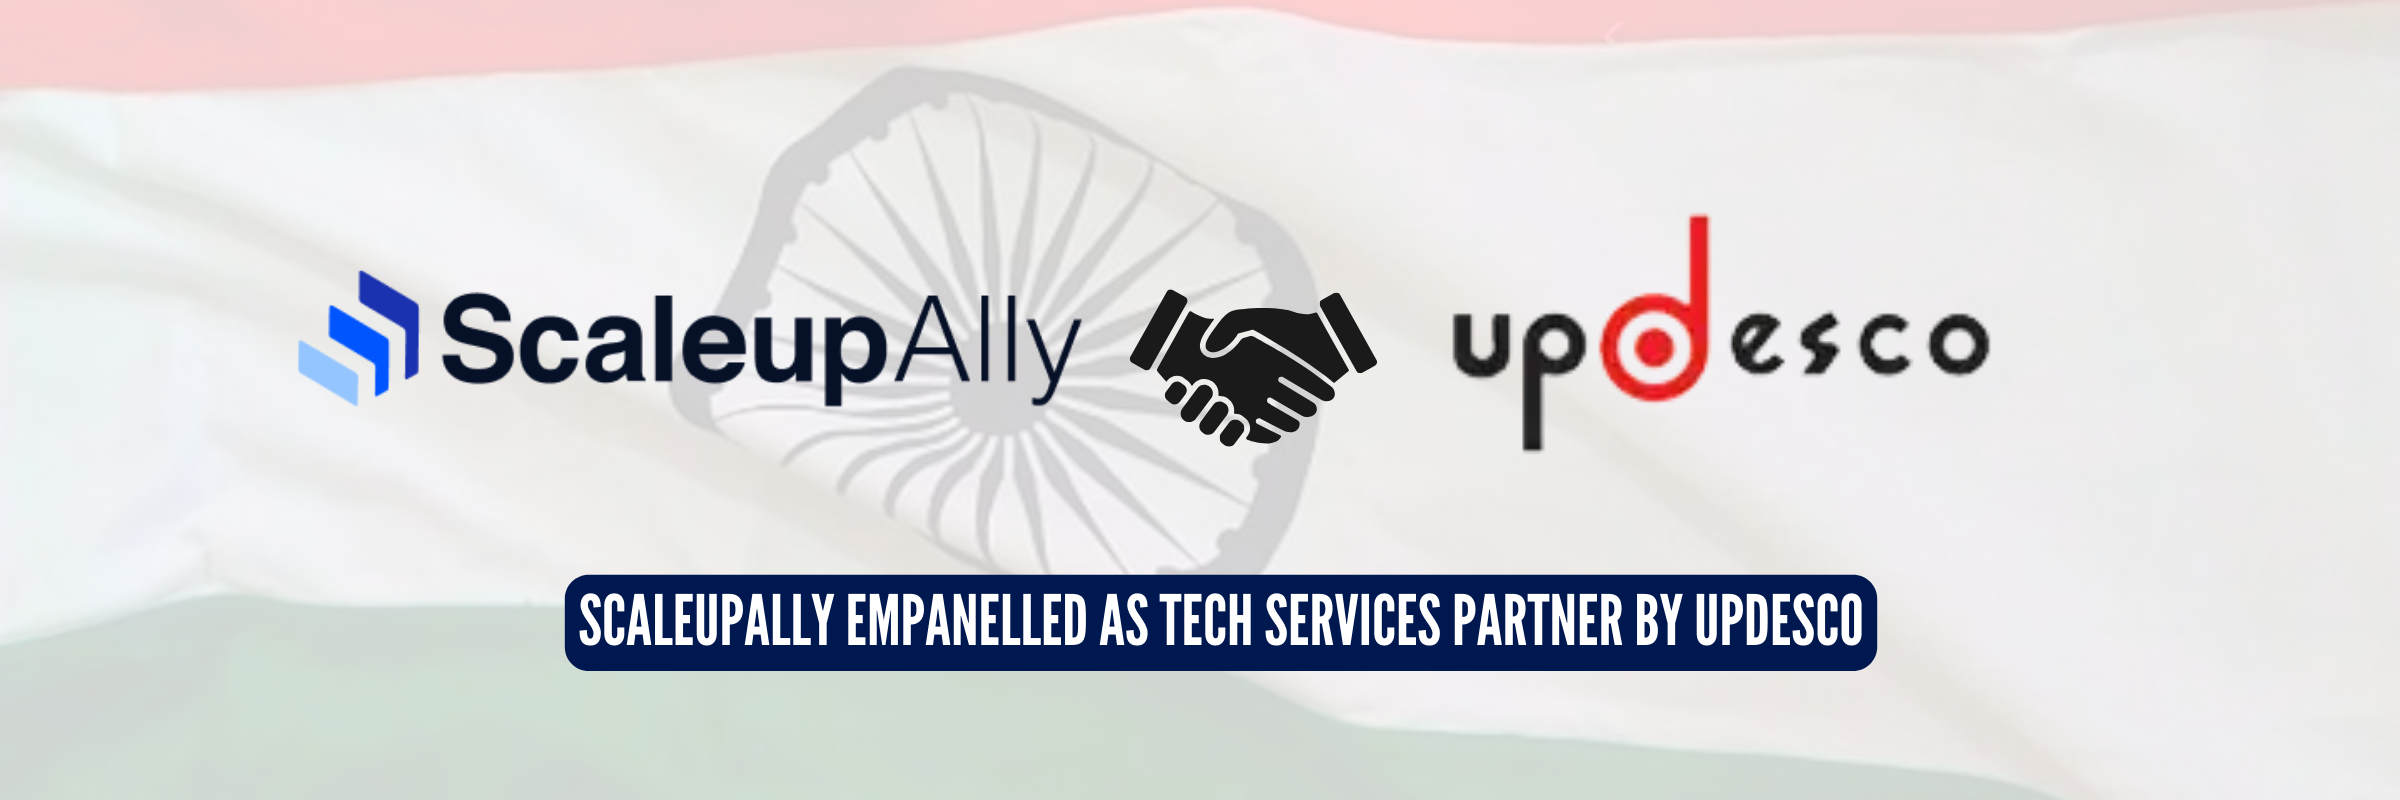 ScaleupAlly Empanelled as Tech Services Partner by UPDESCO